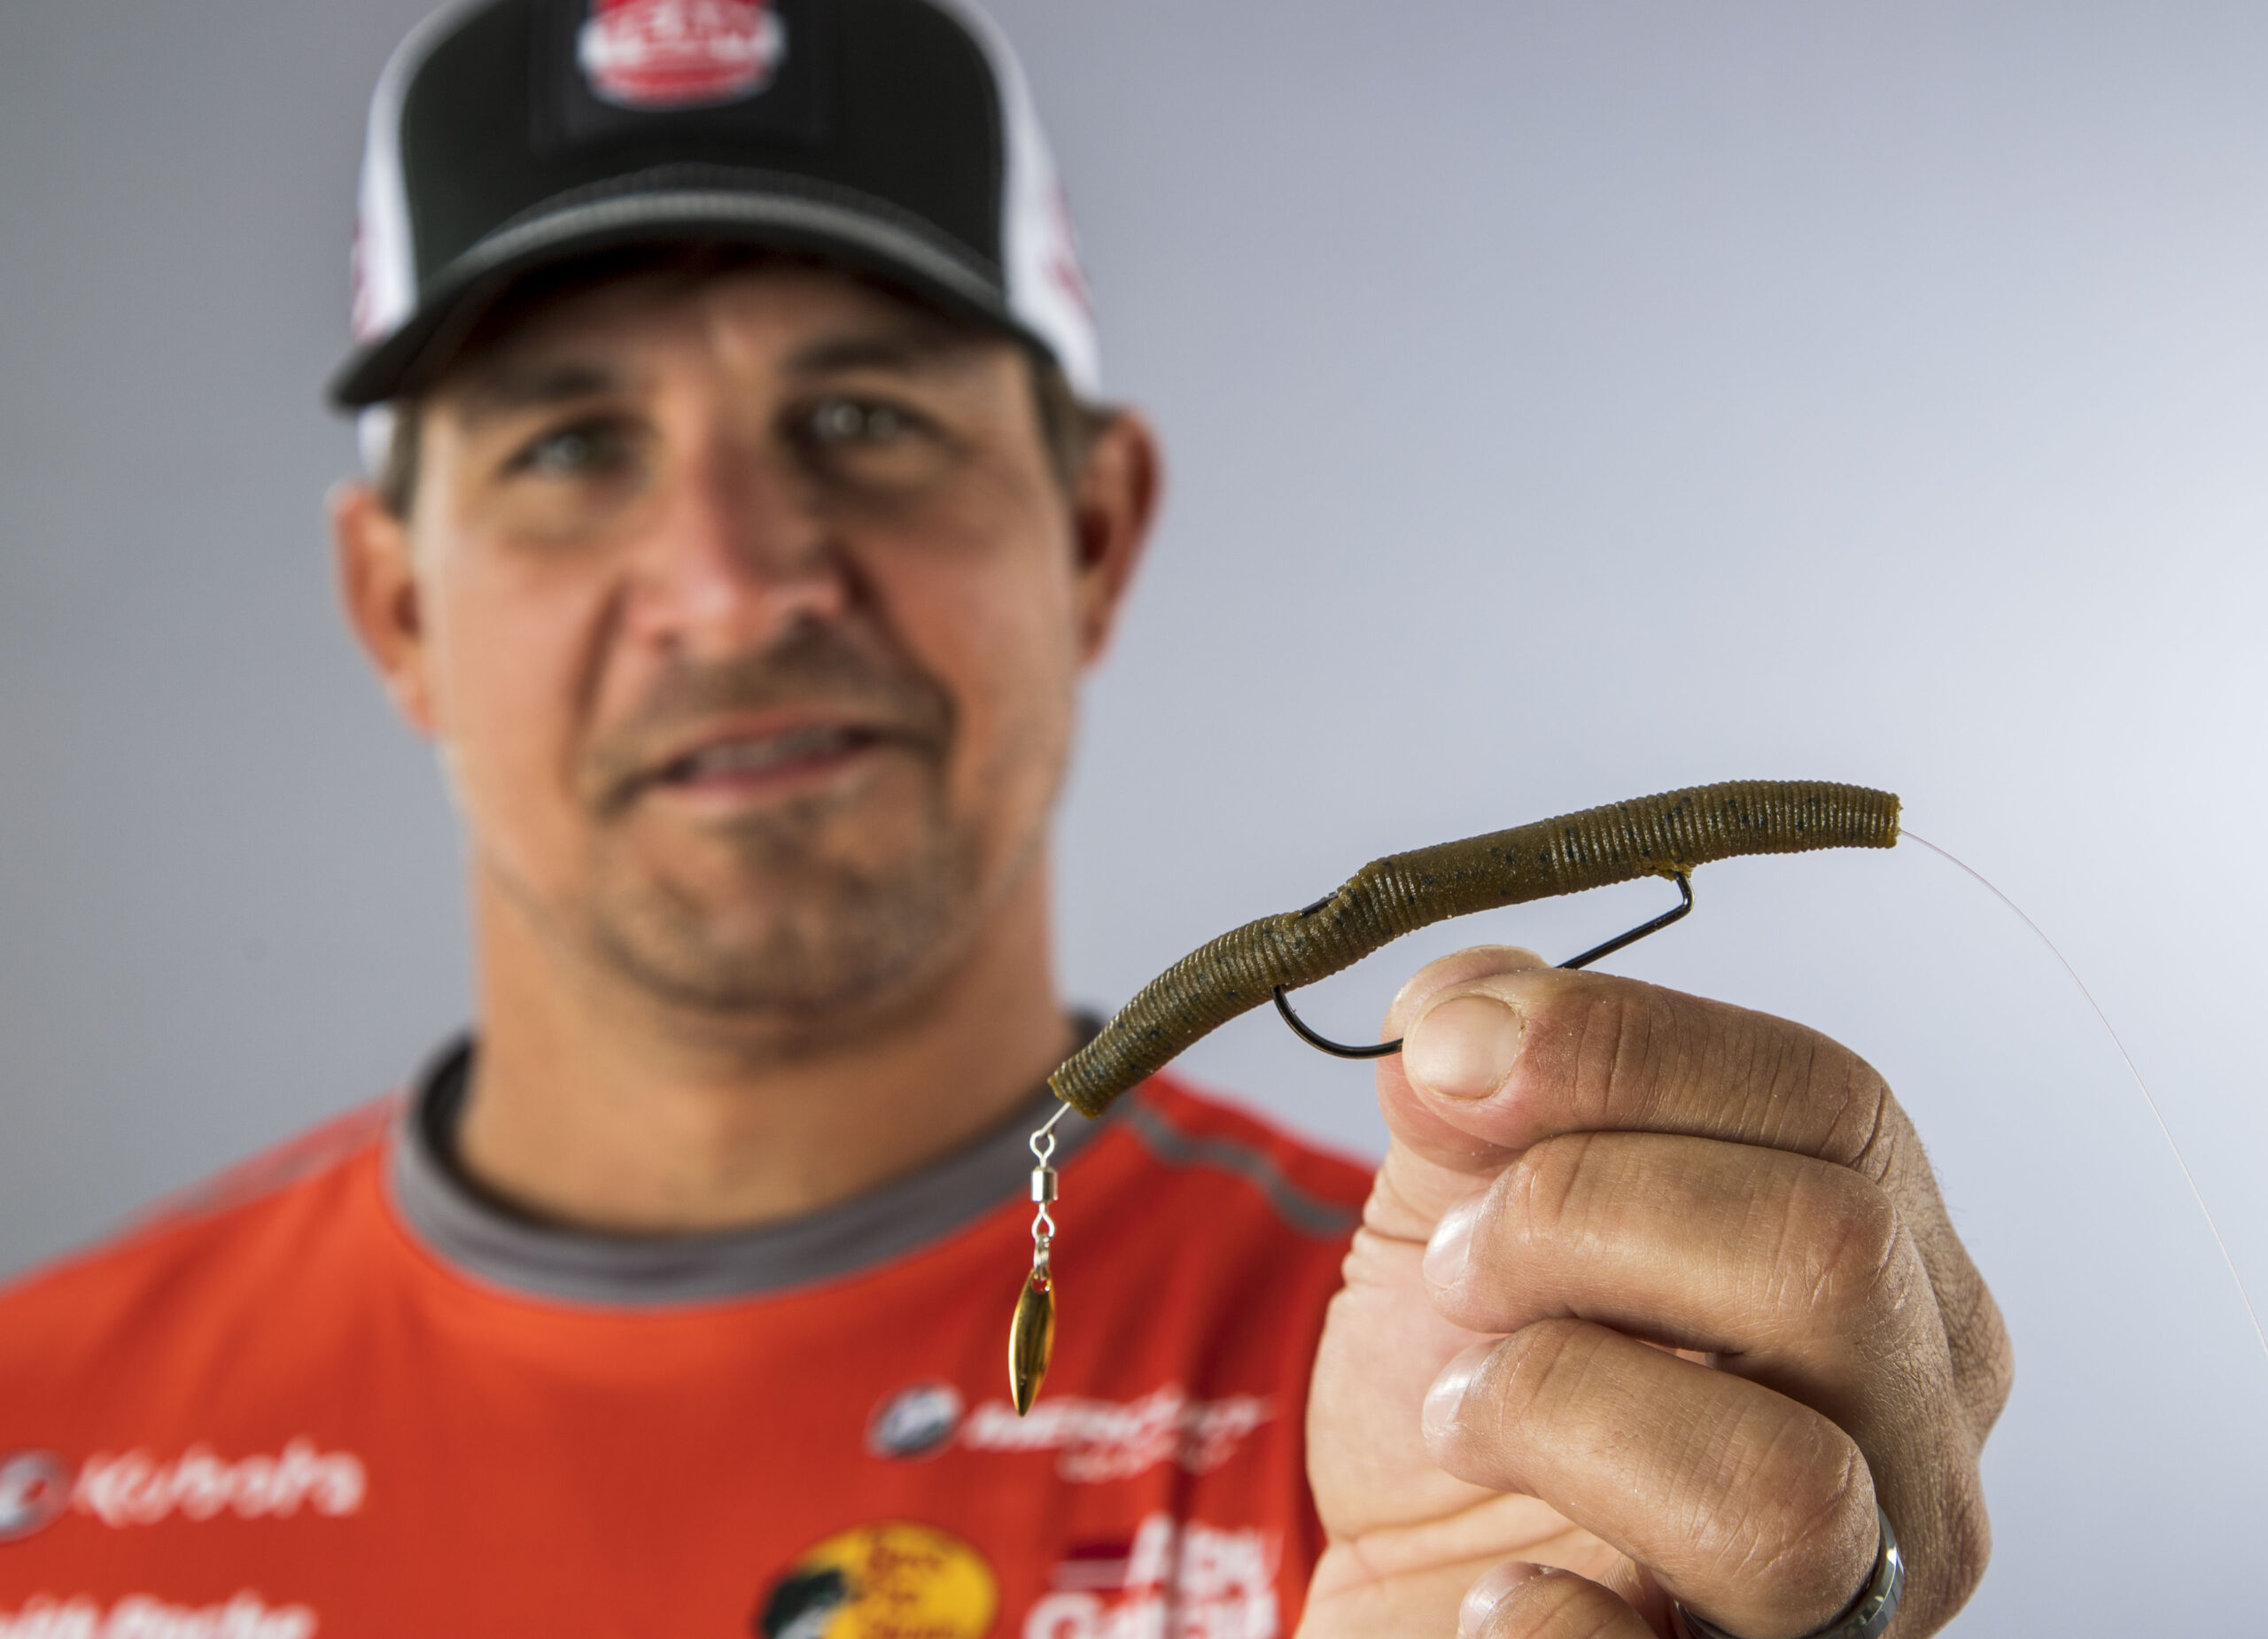 KEITH POCHE: Showing you how to add a little spin to my favorite Florida  bait - Major League Fishing